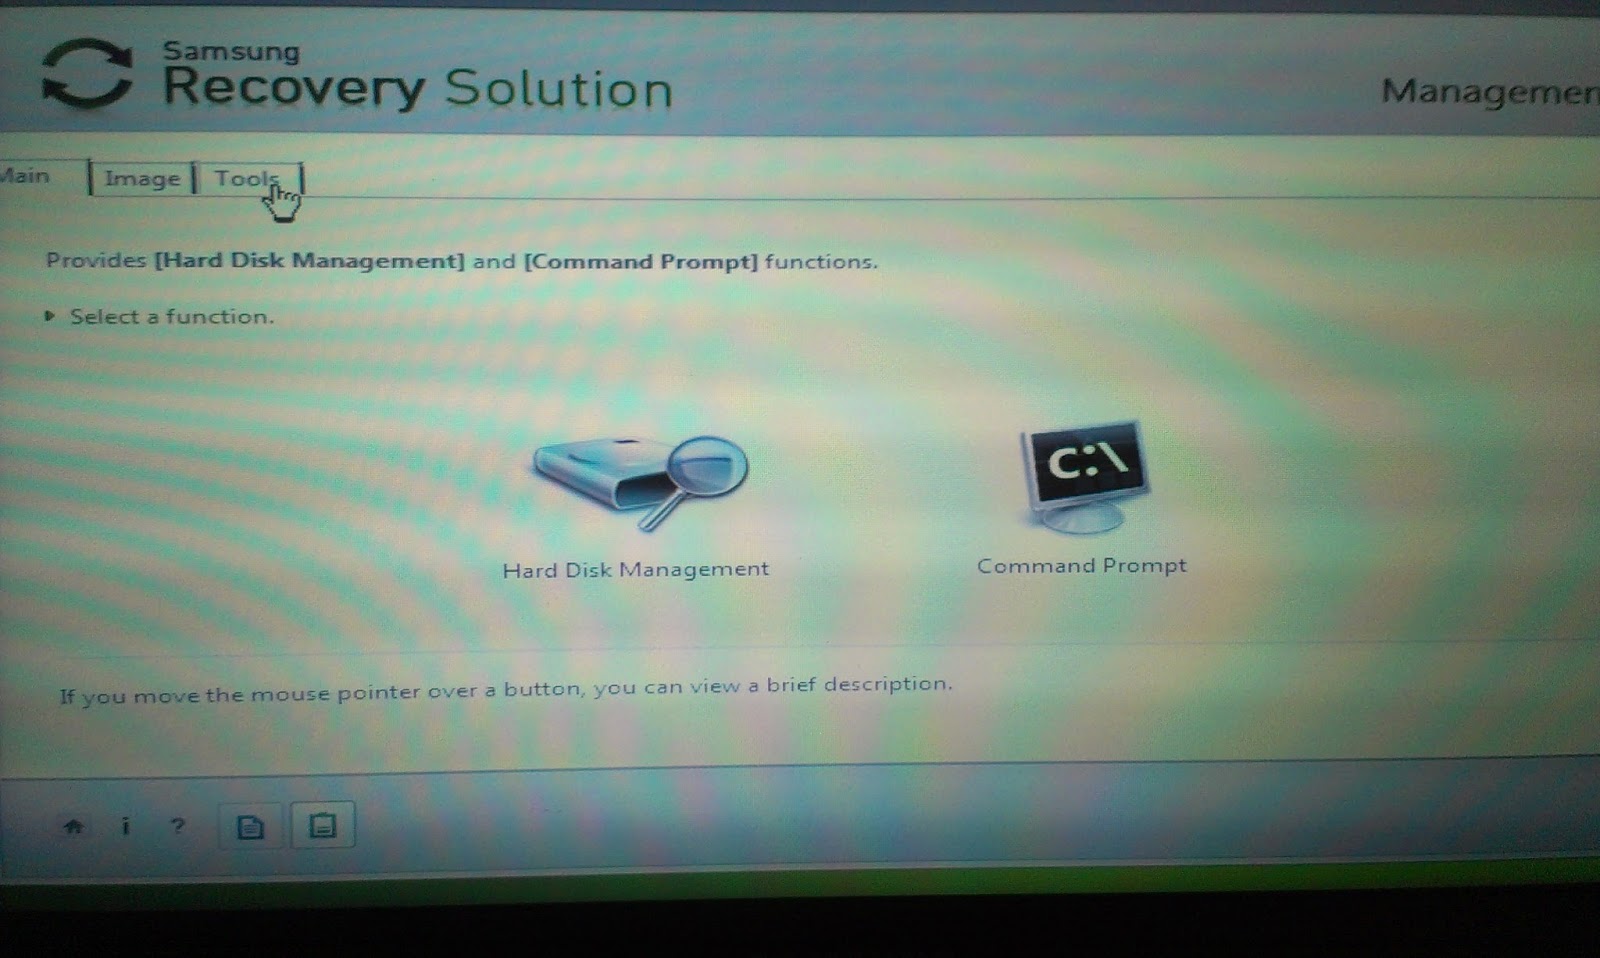 Samsung Recovery Solution Admin Tool